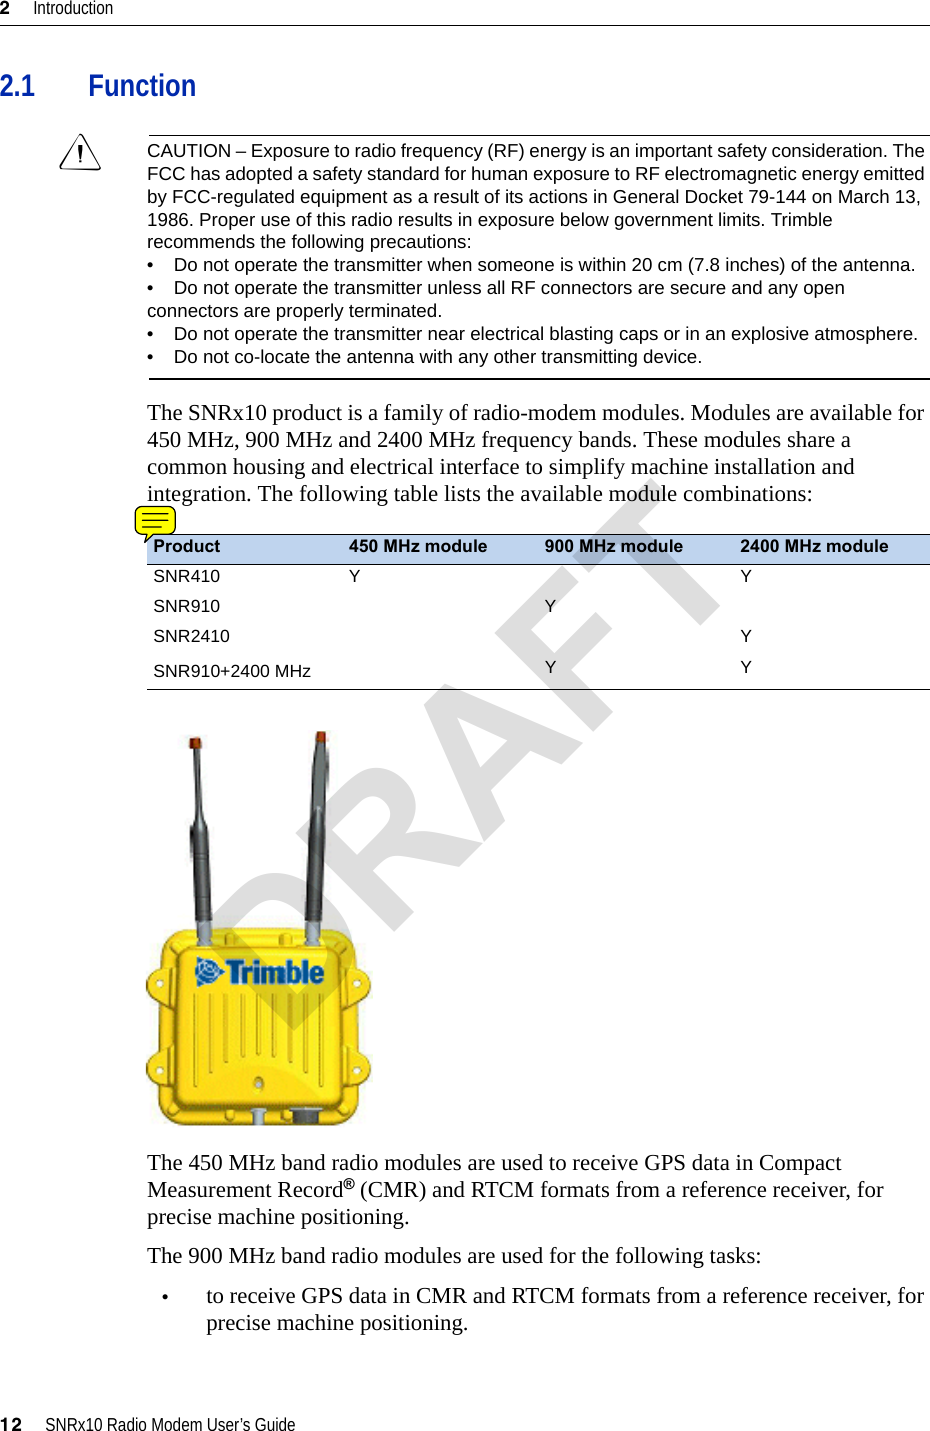 2     Introduction12     SNRx10 Radio Modem User’s Guide2.1 FunctionCCAUTION – Exposure to radio frequency (RF) energy is an important safety consideration. The FCC has adopted a safety standard for human exposure to RF electromagnetic energy emitted by FCC-regulated equipment as a result of its actions in General Docket 79-144 on March 13, 1986. Proper use of this radio results in exposure below government limits. Trimble recommends the following precautions:•    Do not operate the transmitter when someone is within 20 cm (7.8 inches) of the antenna.•    Do not operate the transmitter unless all RF connectors are secure and any open connectors are properly terminated.•    Do not operate the transmitter near electrical blasting caps or in an explosive atmosphere.•    Do not co-locate the antenna with any other transmitting device.The SNRx10 product is a family of radio-modem modules. Modules are available for 450 MHz, 900 MHz and 2400 MHz frequency bands. These modules share a common housing and electrical interface to simplify machine installation and integration. The following table lists the available module combinations:The 450 MHz band radio modules are used to receive GPS data in Compact Measurement Record® (CMR) and RTCM formats from a reference receiver, for precise machine positioning.The 900 MHz band radio modules are used for the following tasks:•to receive GPS data in CMR and RTCM formats from a reference receiver, for precise machine positioning.Product 450 MHz module 900 MHz module 2400 MHz moduleSNR410 Y YSNR910 YSNR2410 YSNR910+2400 MHz YYDRAFT